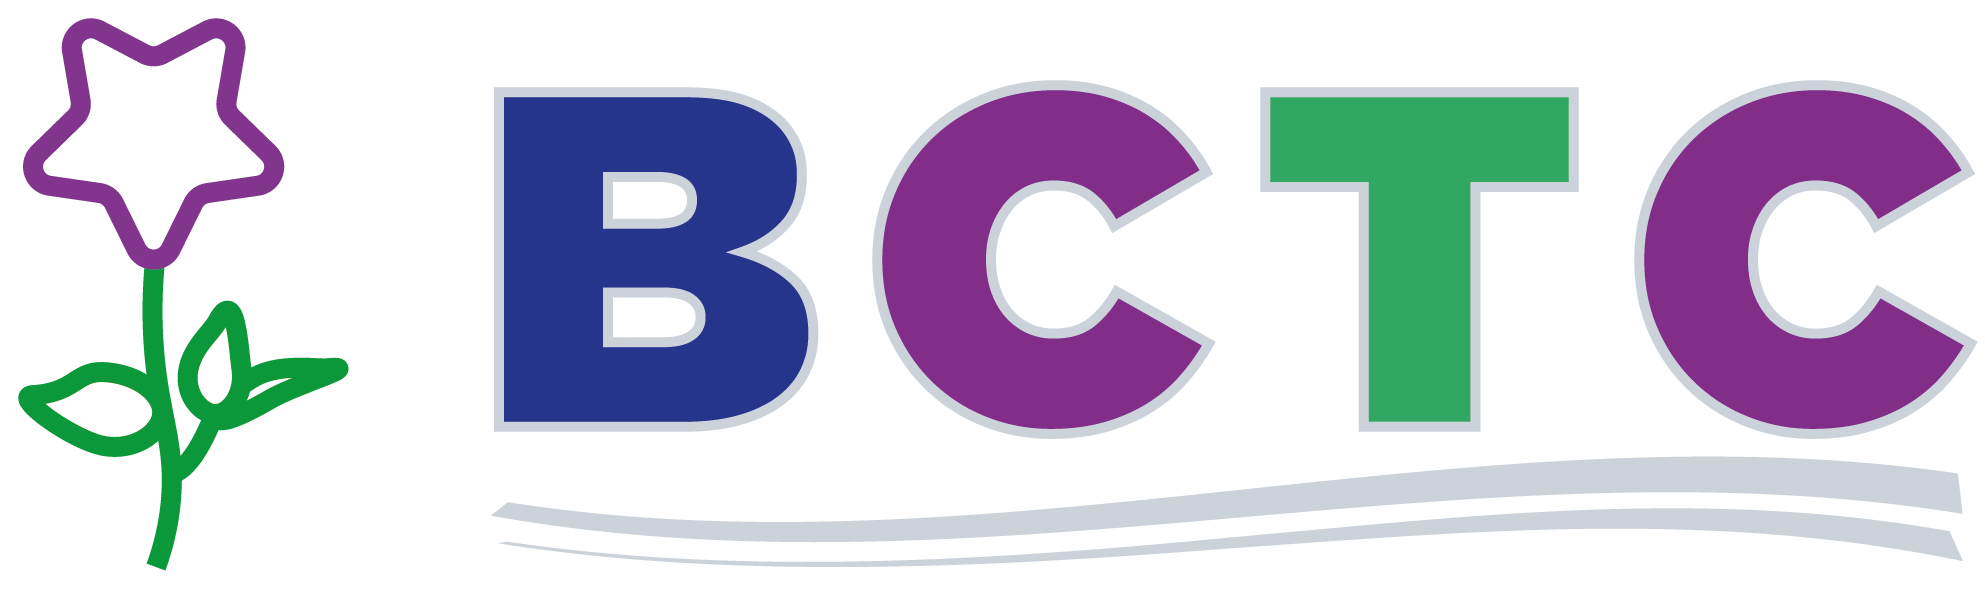 BCTC Toolkit - Effective Communication